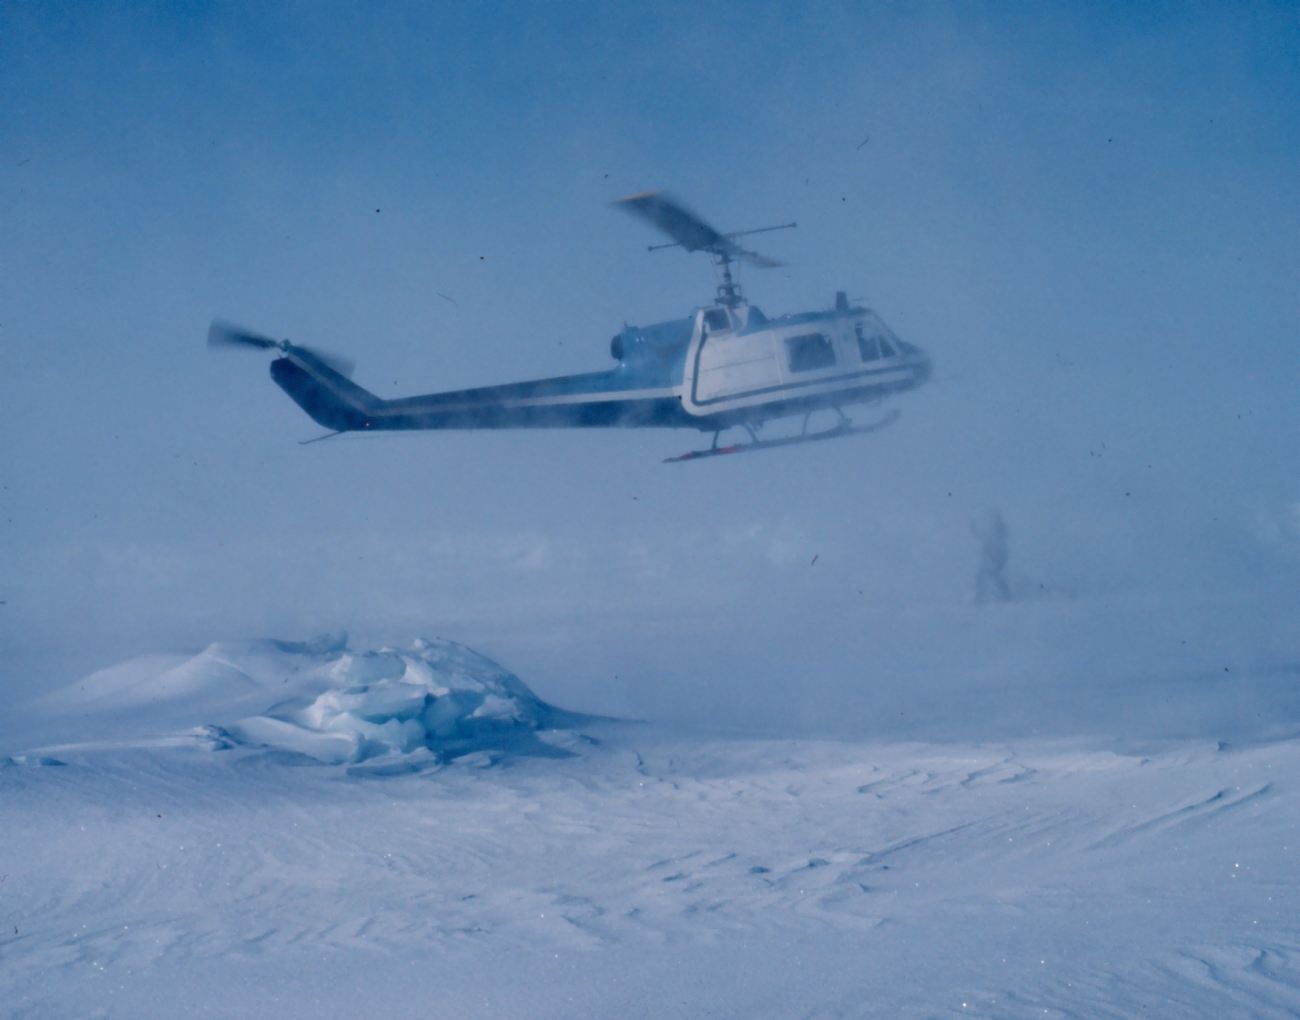 NOAA Bell UH-1M helicopter getting in position to weigh sedated polar bear